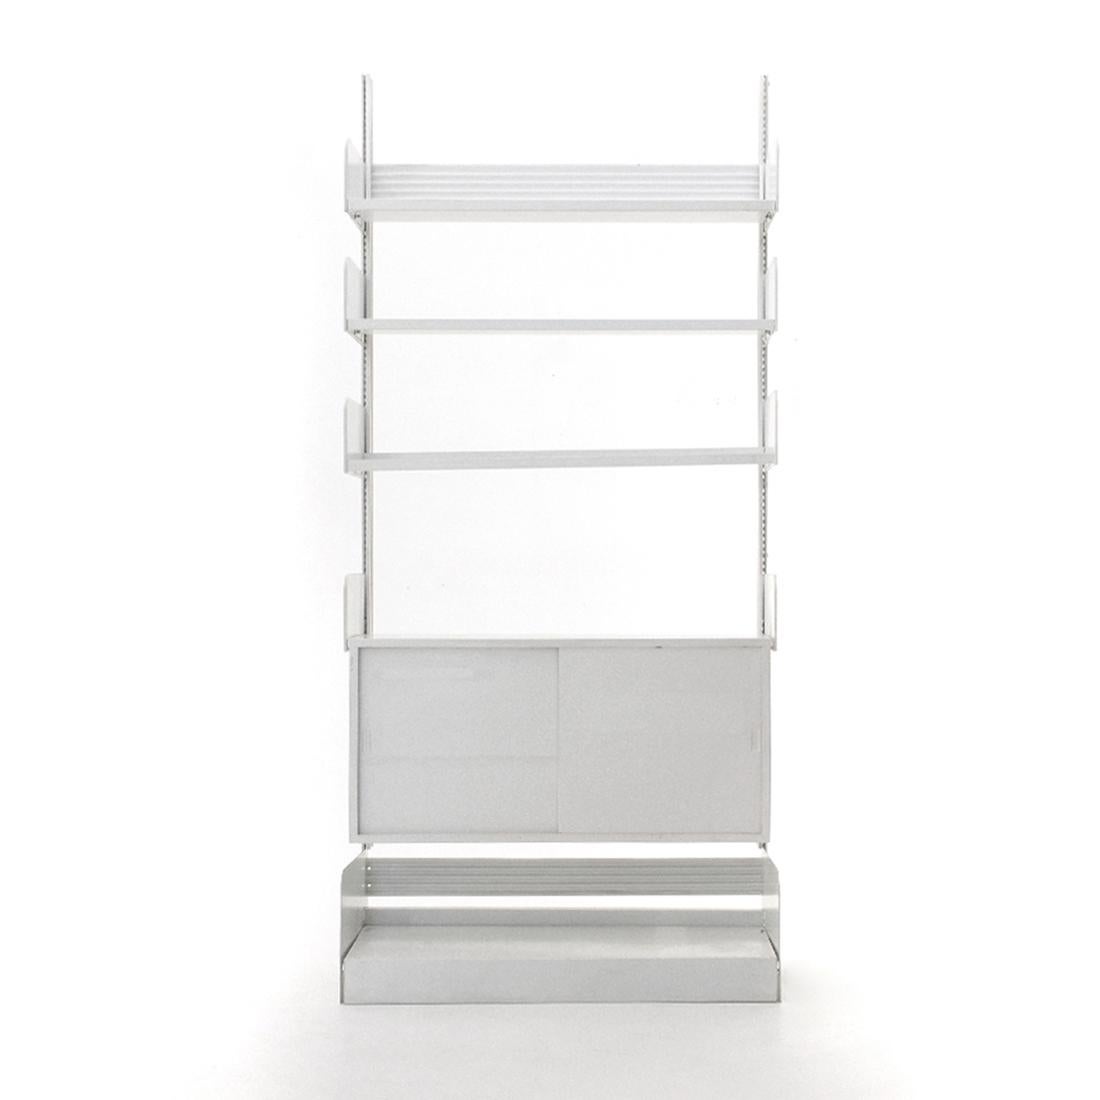 Italian-made bookcase produced in the 1960s.
Structure in white painted metal, totally demountable.
Shelves and container compartment that can be positioned in different positions.
Good general conditions, some marks and halos due to normal use